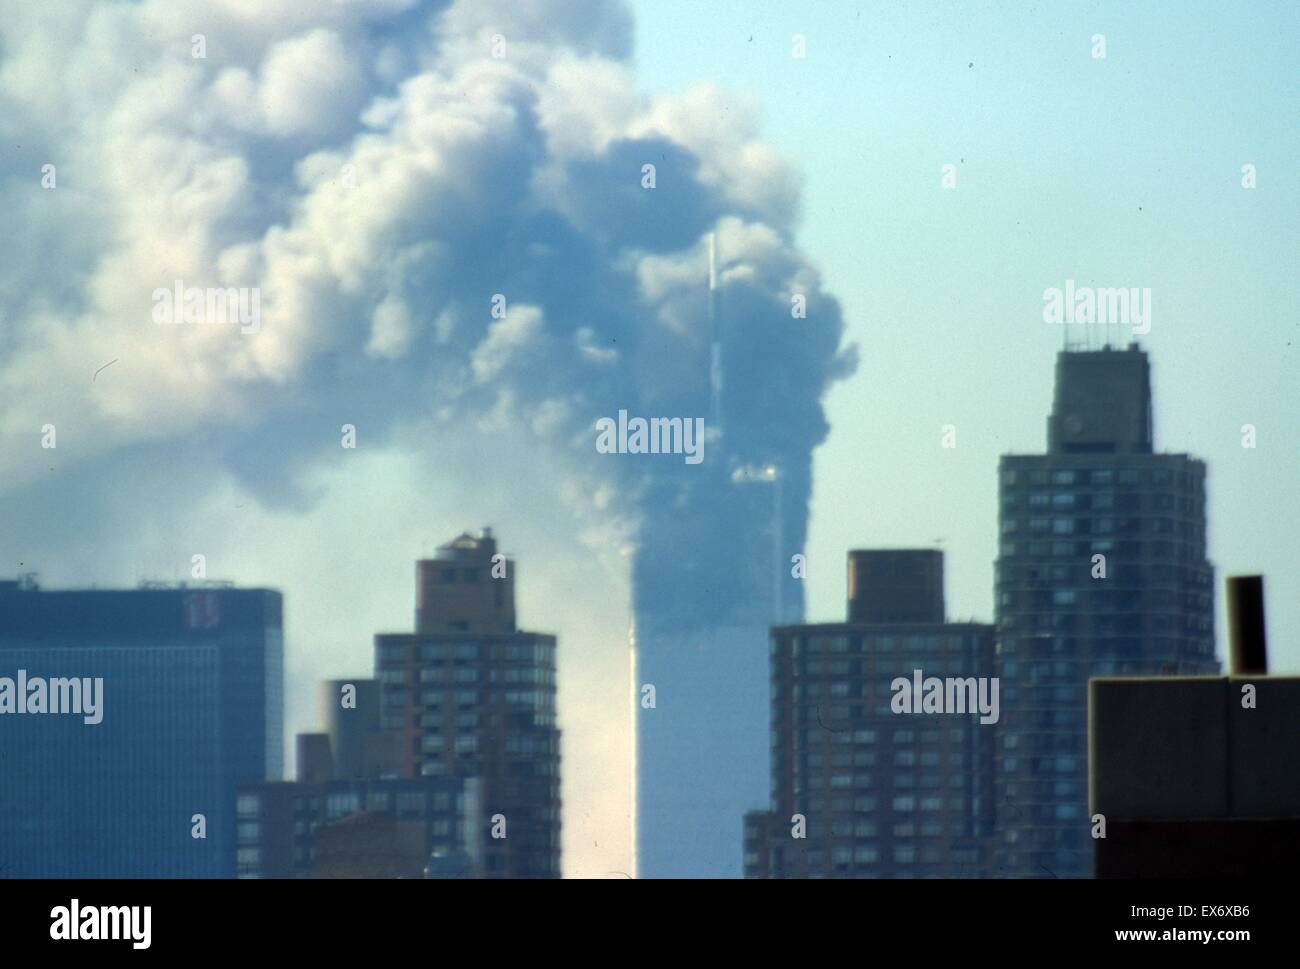 The September 11 (or 9/11) Islamic terrorist group al-Qaeda attacks on New York City, September 11, 2001. Two of the planes, were crashed into the North and South towers, of the World Trade Center complex in New York City. Within two hours, both 110-story Stock Photo